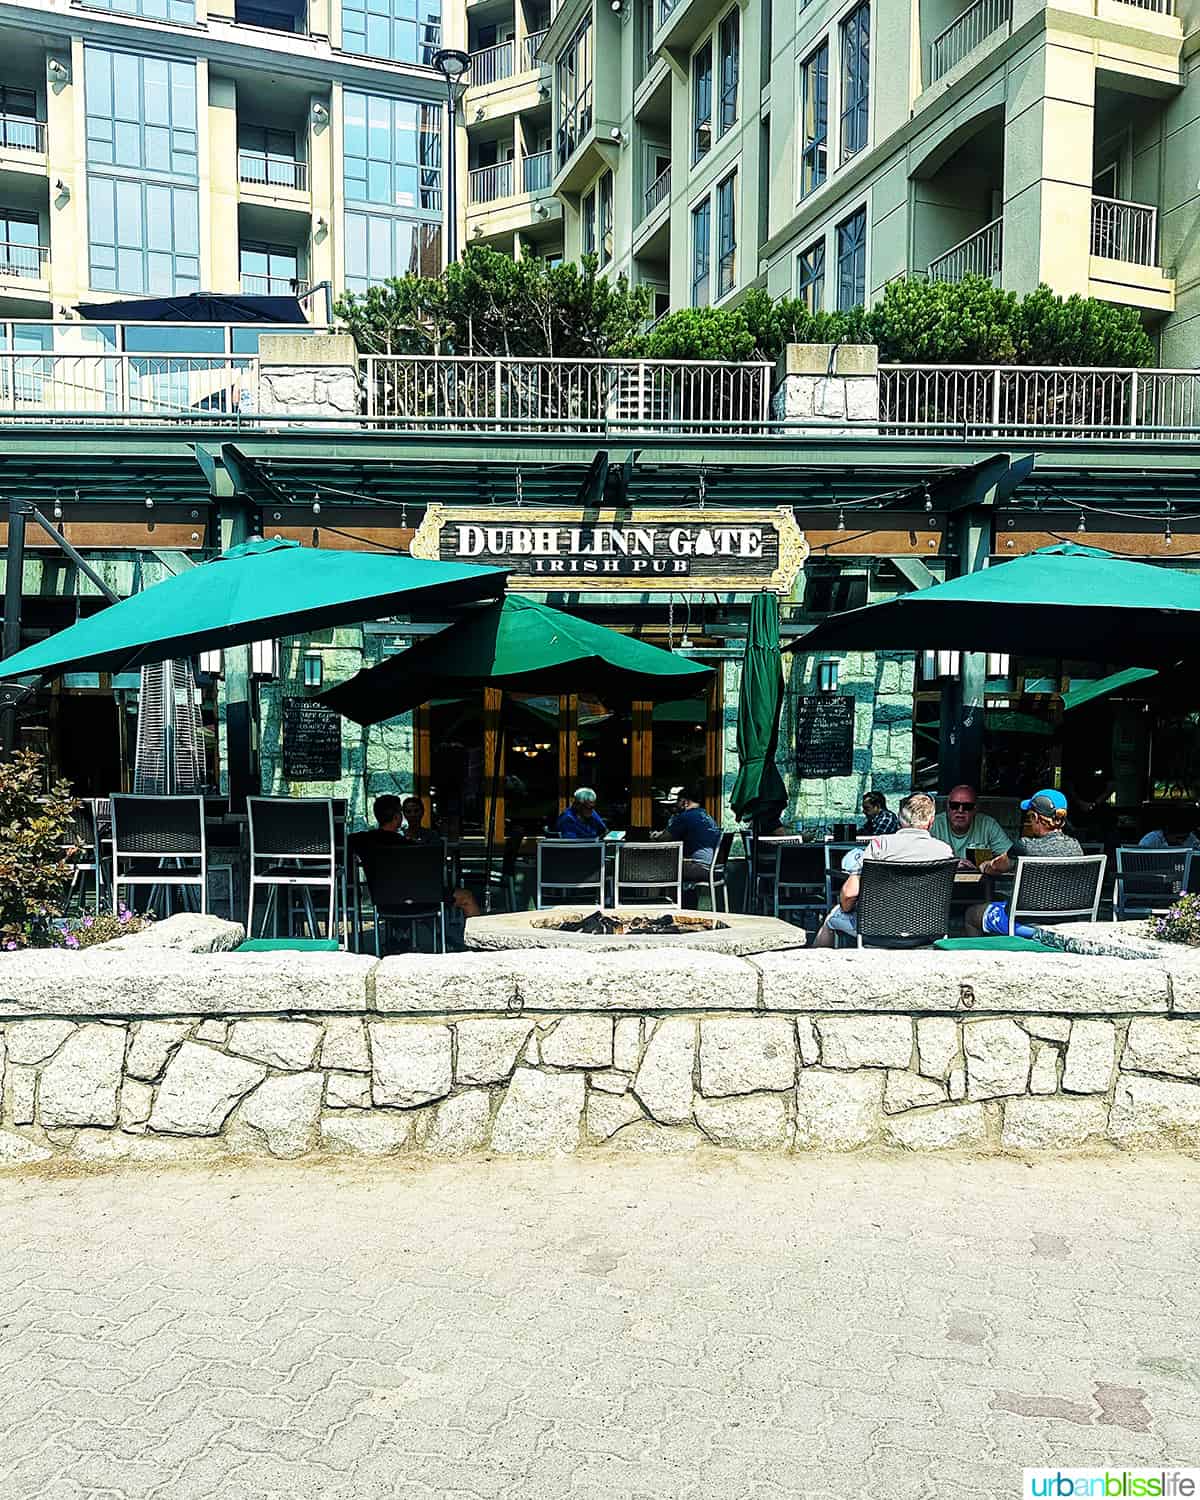 exterior patio of at Dubh Linn Gate Pub in Whistler BC Canada.